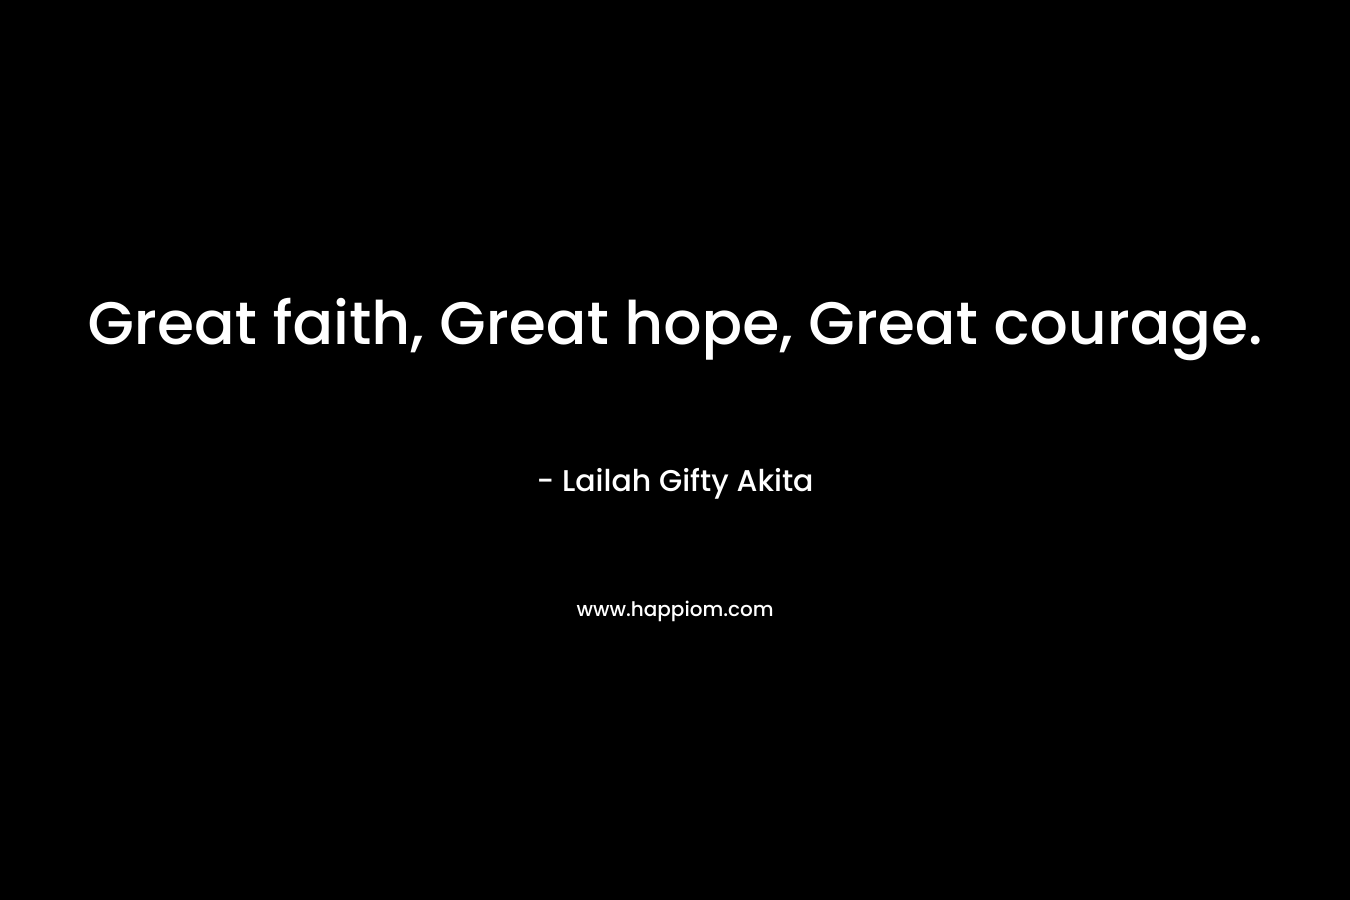 Great faith, Great hope, Great courage.